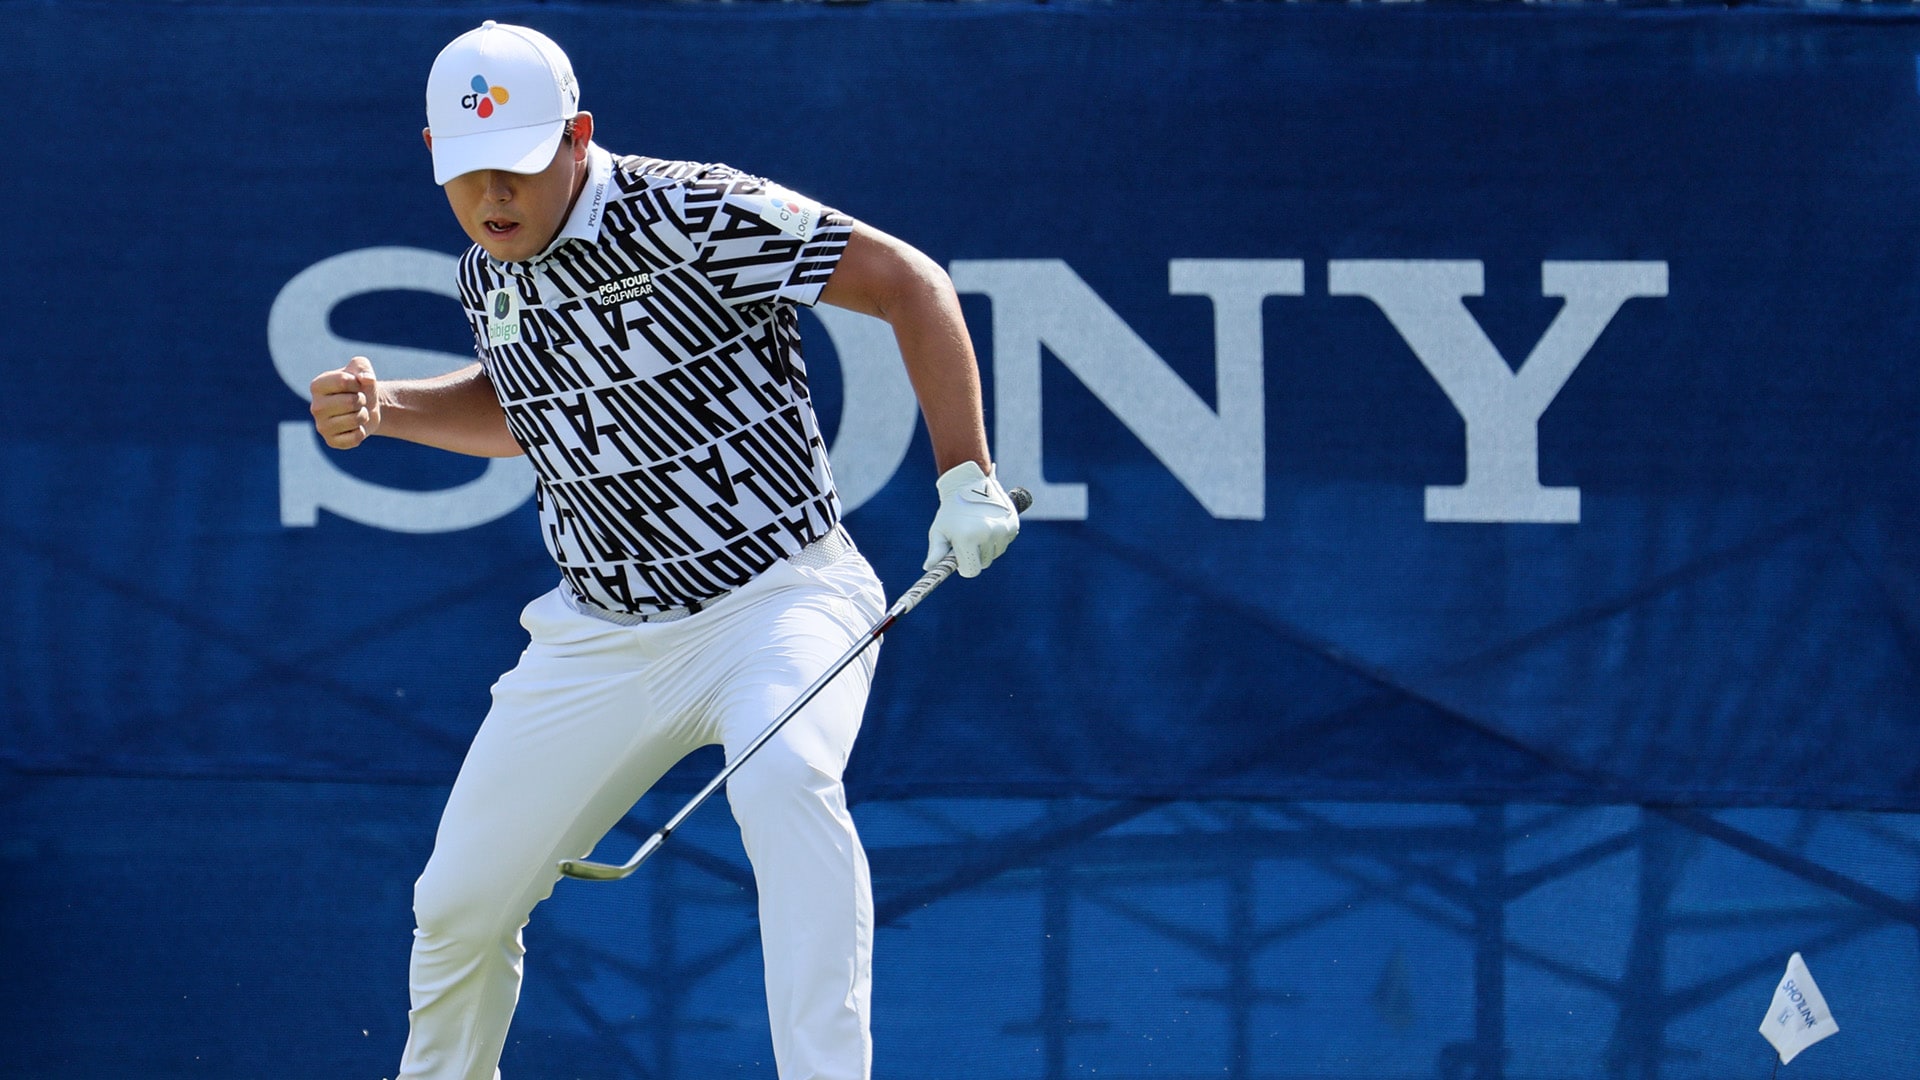 Si Woo Kim on clutch shot that helped him win Sony Open: ‘Lucky chip’